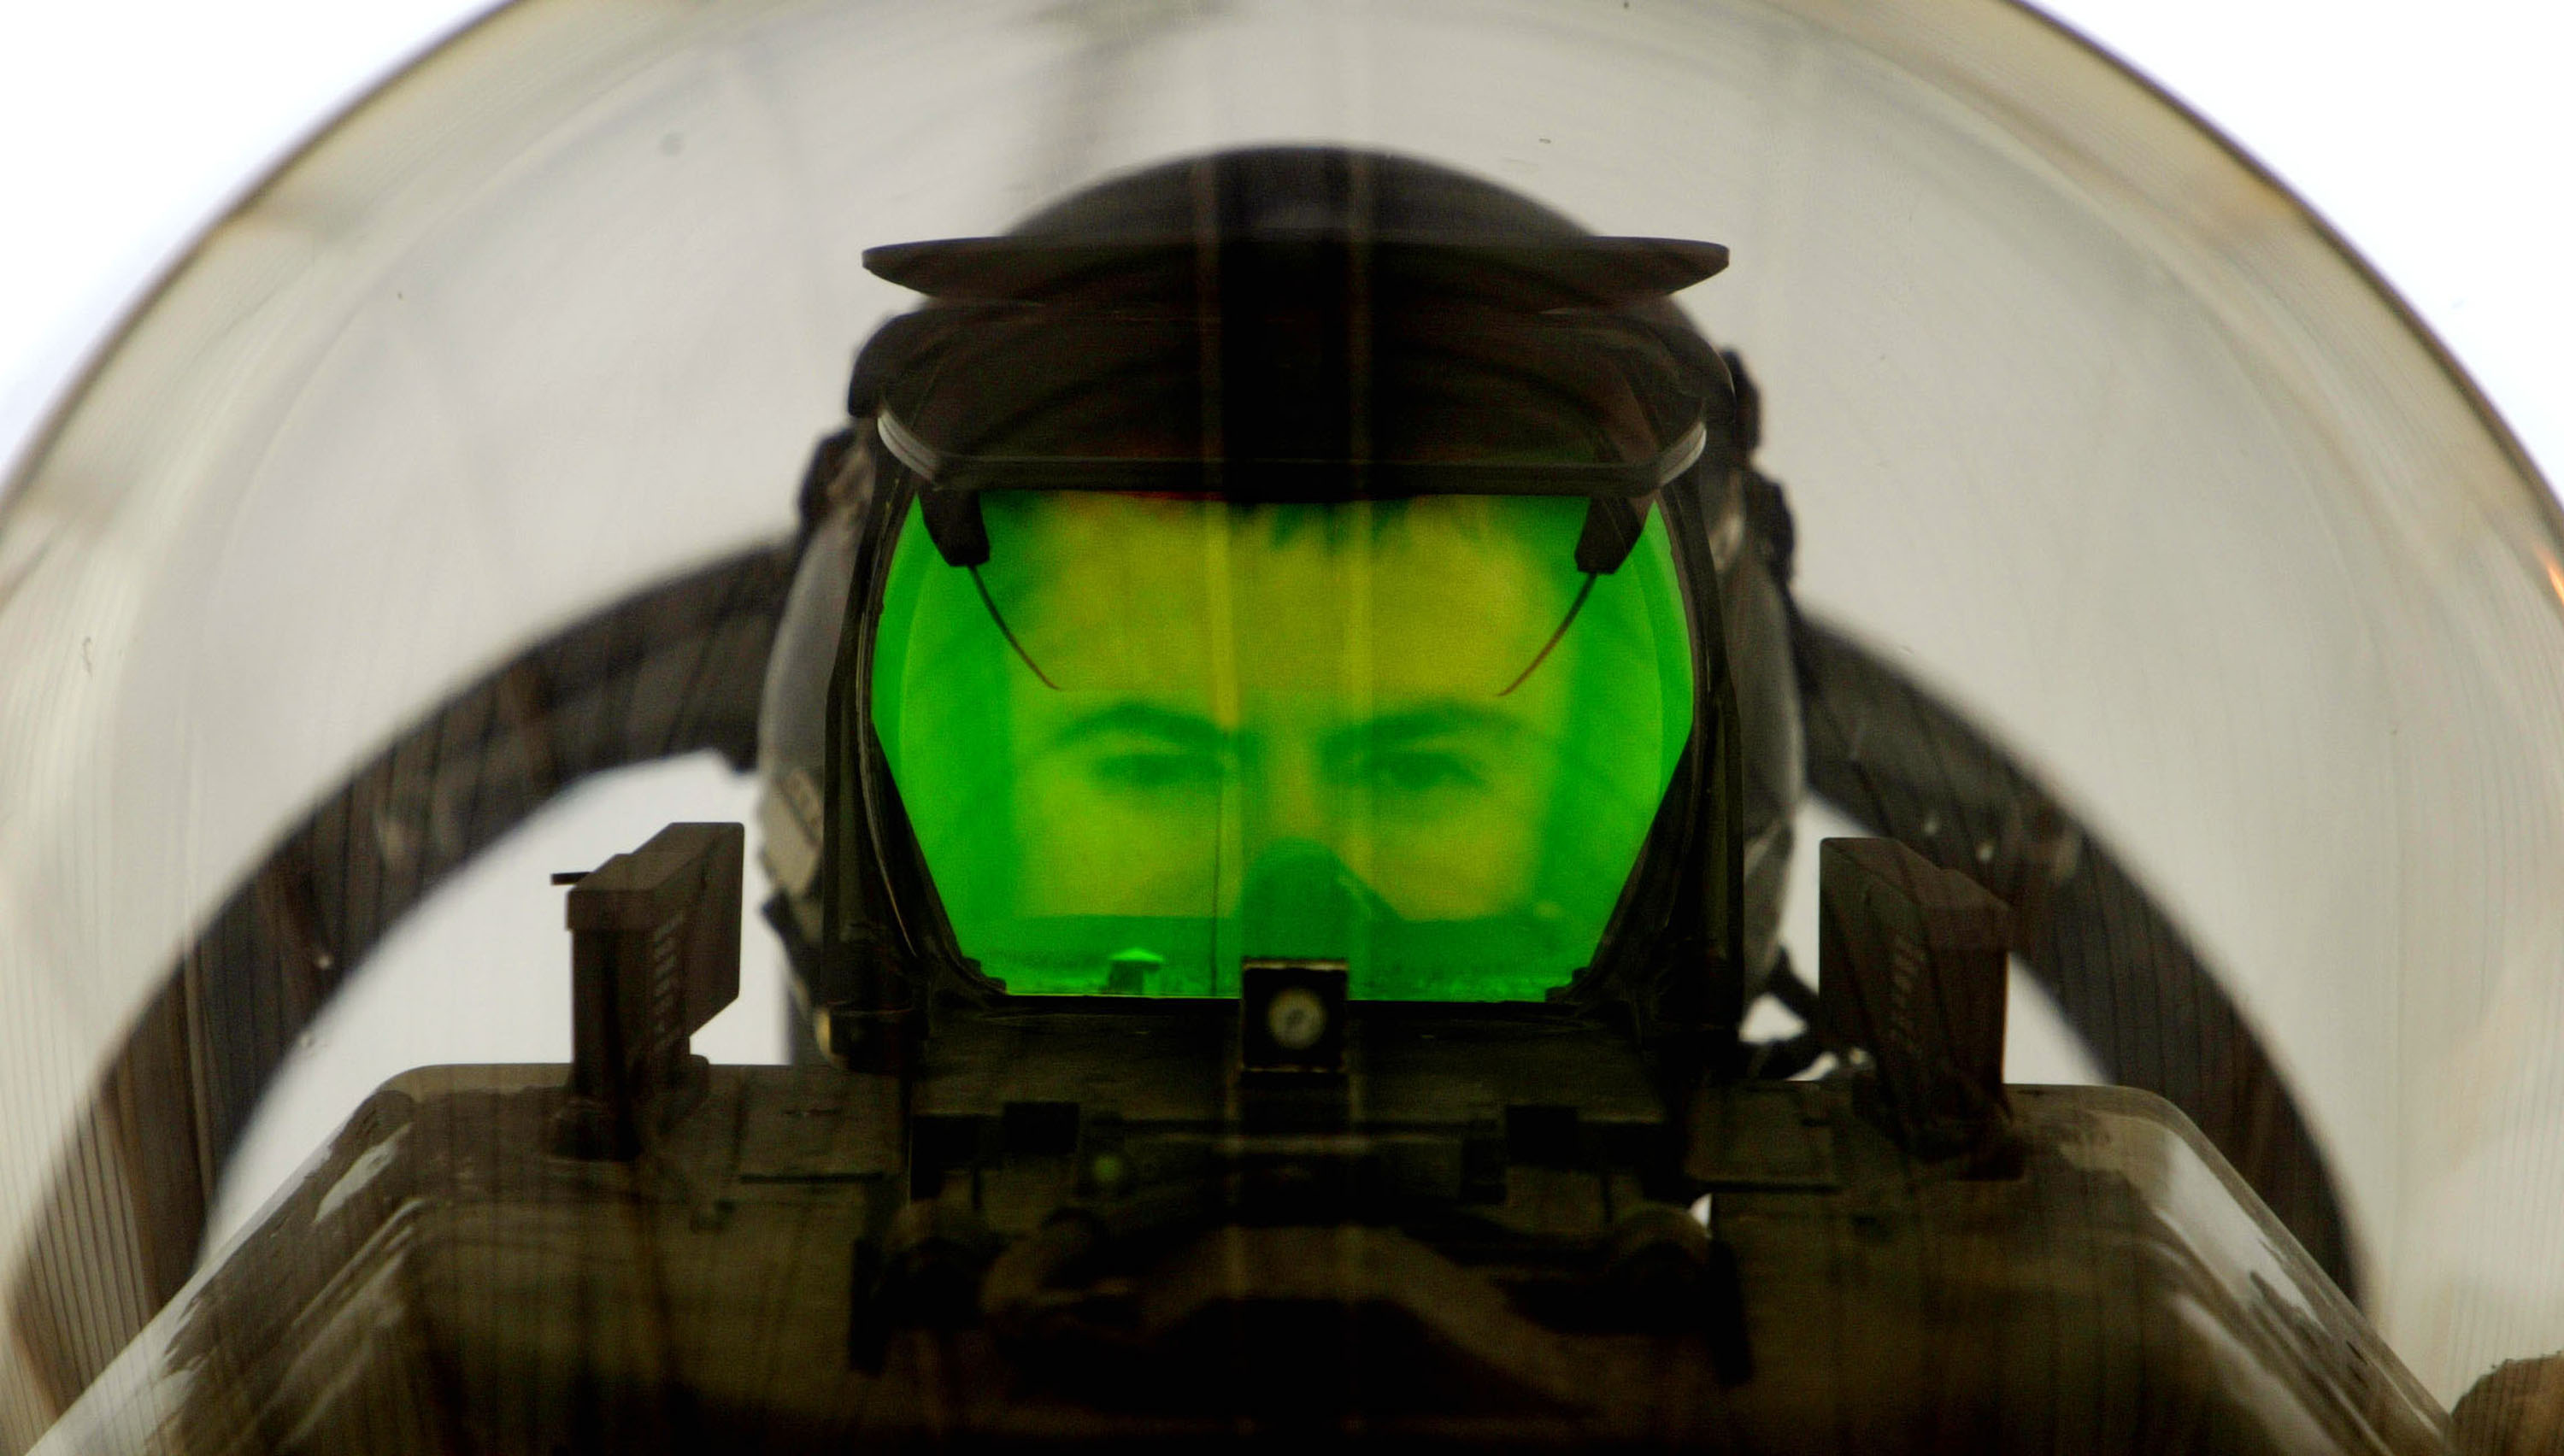 A U.S. Air Force pilot looks through the Heads Up Display (HUD) of his F-16 "Fighting Falcon" as he prepares to deploy on a mission April 2, 2003 at an air base near the Iraqi border. (Ian Waldie&mdash;Getty Images)